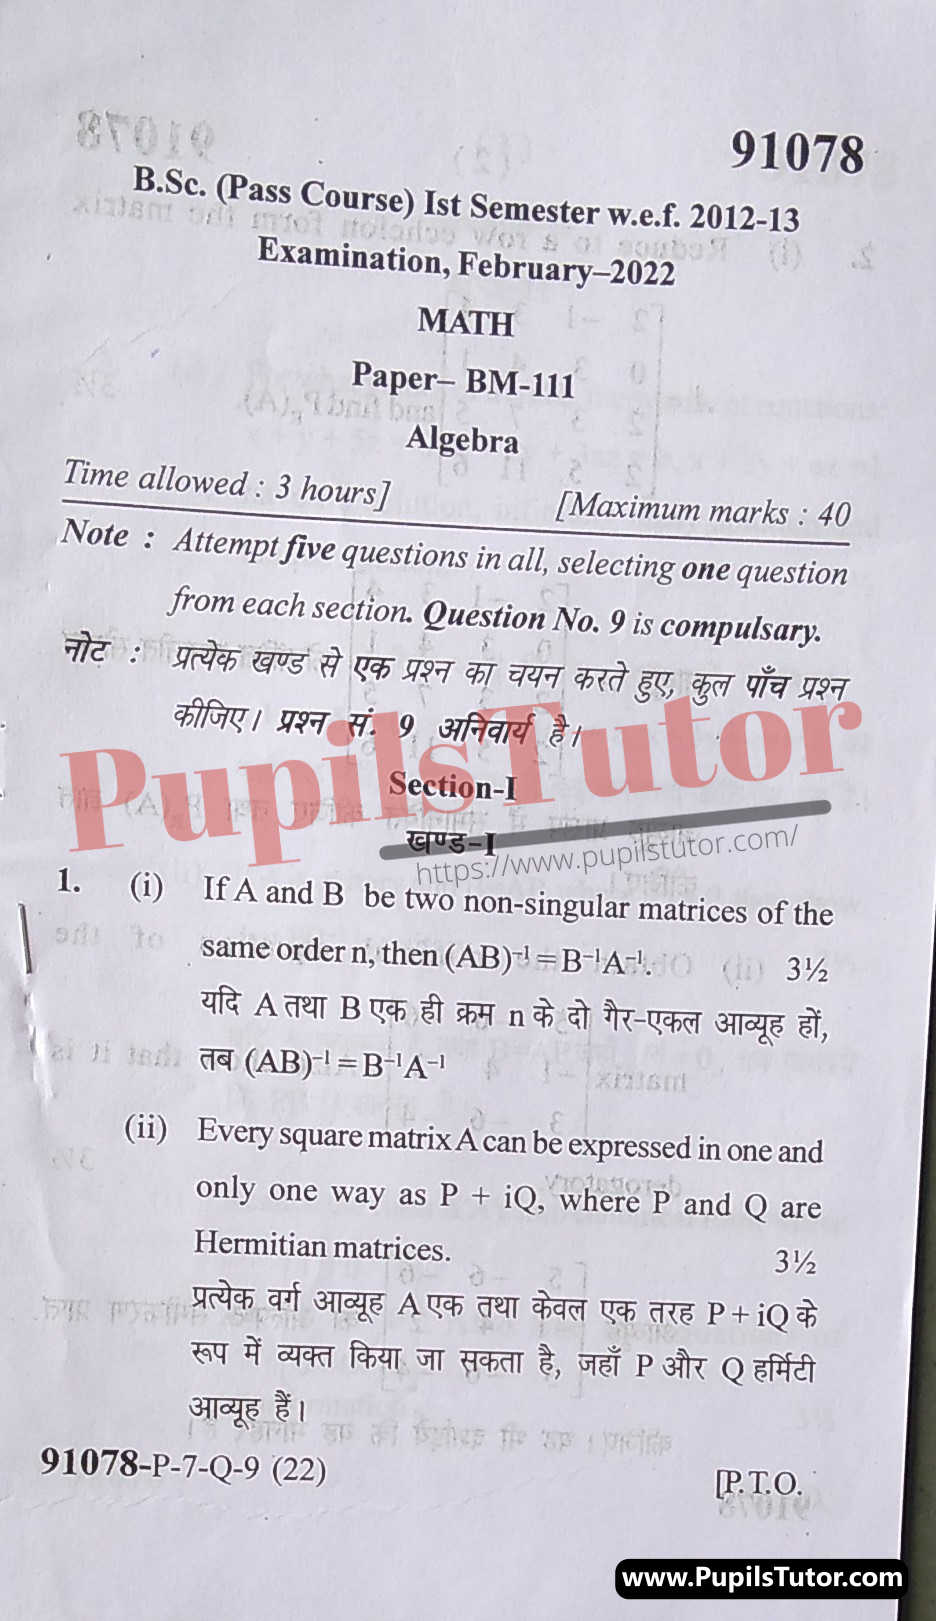 MDU (Maharshi Dayanand University, Rohtak Haryana) BSc Math Pass Course First Semester Previous Year Algebra Question Paper For February, 2022 Exam (Question Paper Page 1) - pupilstutor.com